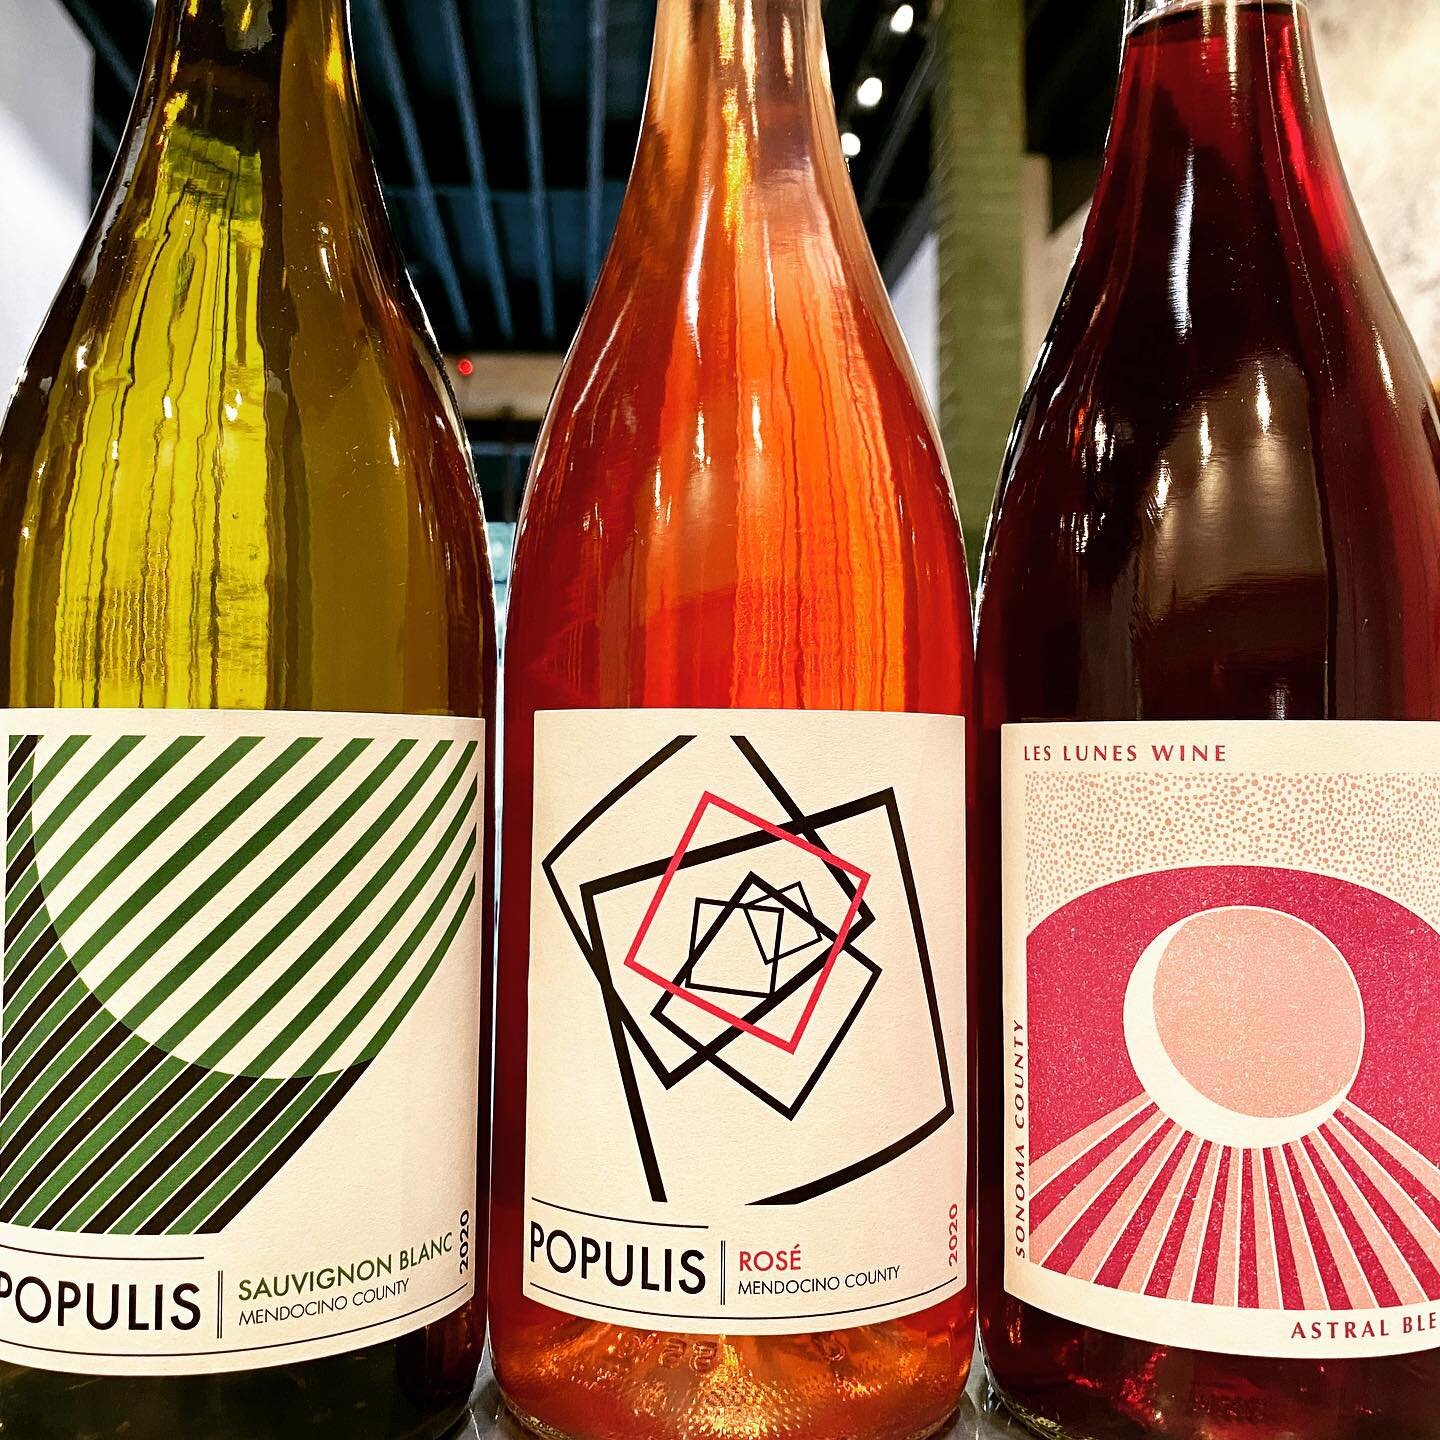 Locals Shaunt Oungoulian and Diego Roig have generated serious fanfare with their labels Populis and Les Lunes Wine, and we&rsquo;ve got their brand-new 2020 releases for you. Major proponents of regenerative farming practices and restoring historic 